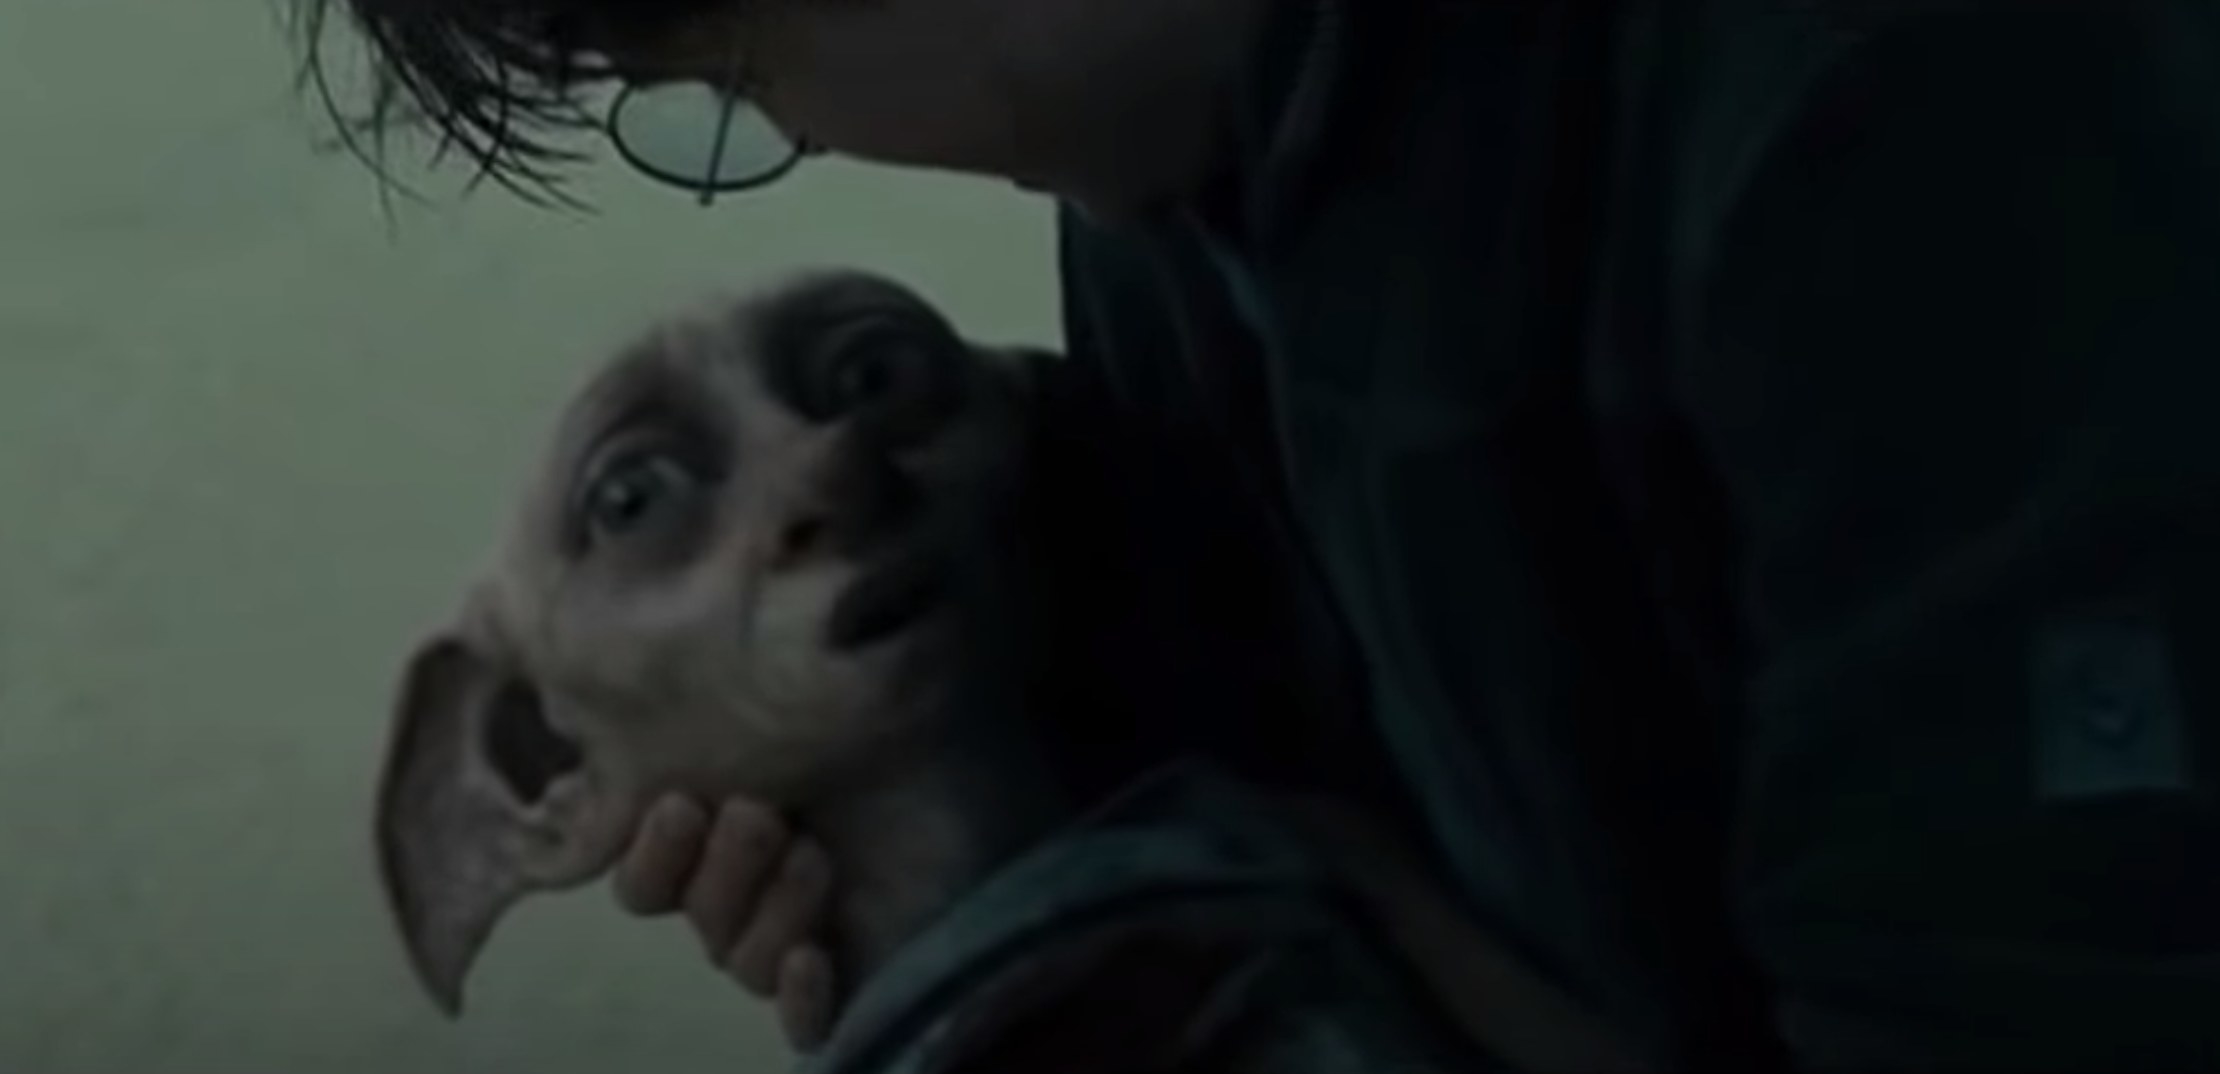 Dobby in Harry Potter&#x27;s arms